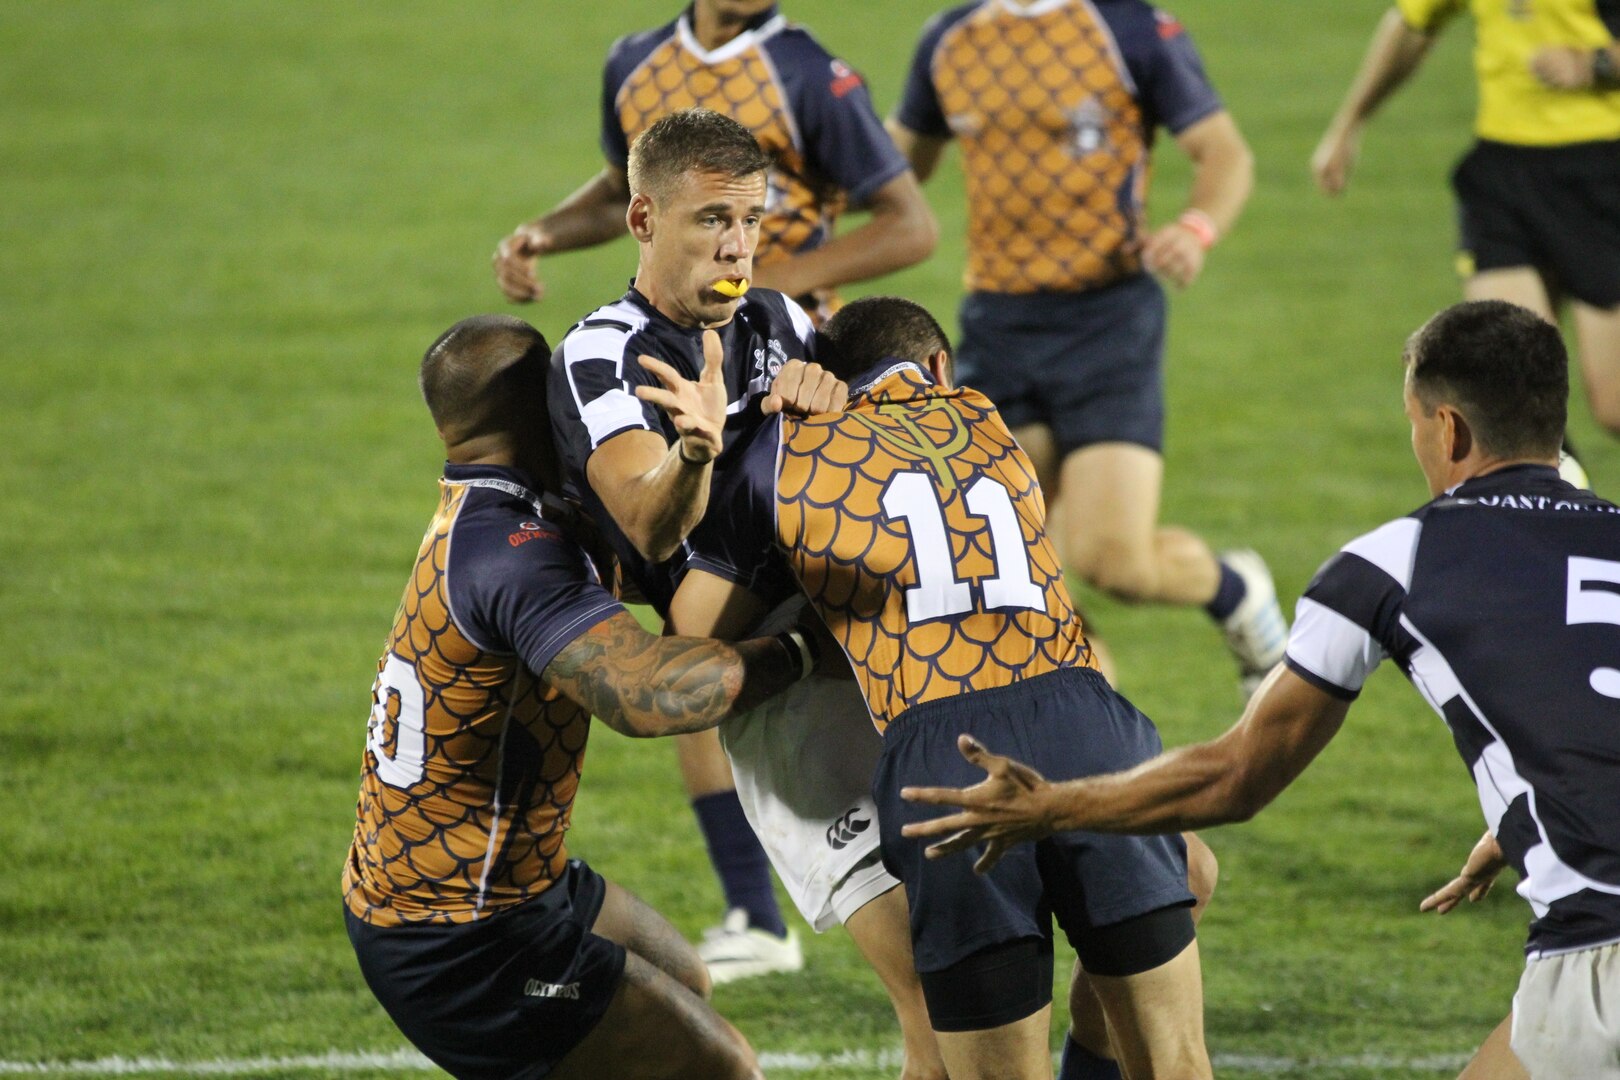 Coast Guard Petty Officer 3d Class Alex Vinkavich (center black/white) is tackled by Navy's Seaman Urban Iyo (#11). Coast Guard would defeat the Navy 14-10 at the 2014 Armed Forces Rugby 7’s Championship in Glendale, Colo. 15-17 August.